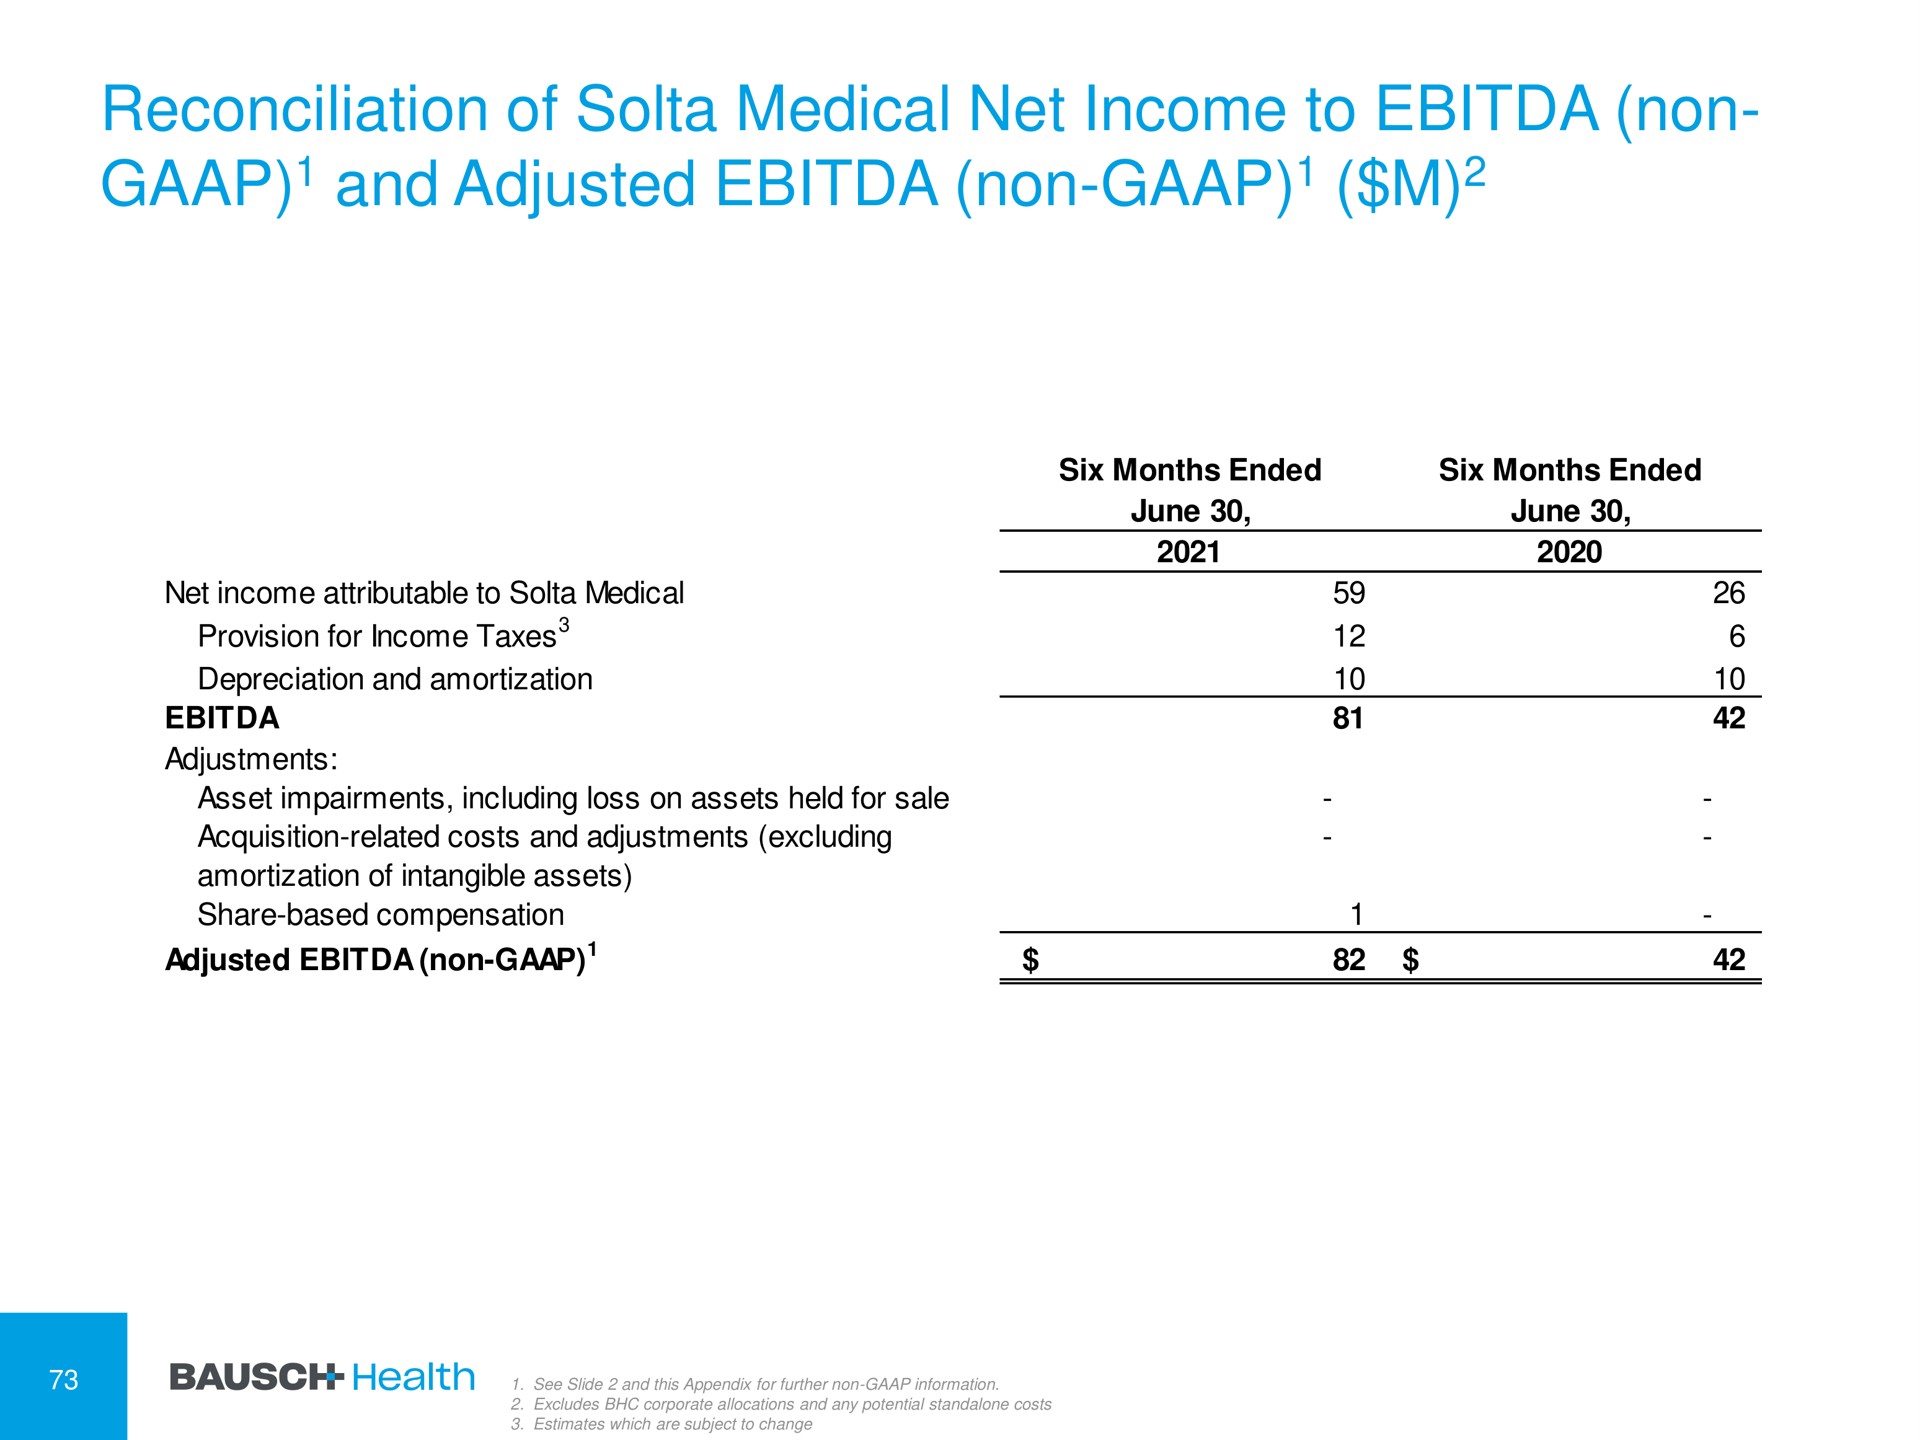 reconciliation of medical net income to non and adjusted non | Bausch Health Companies